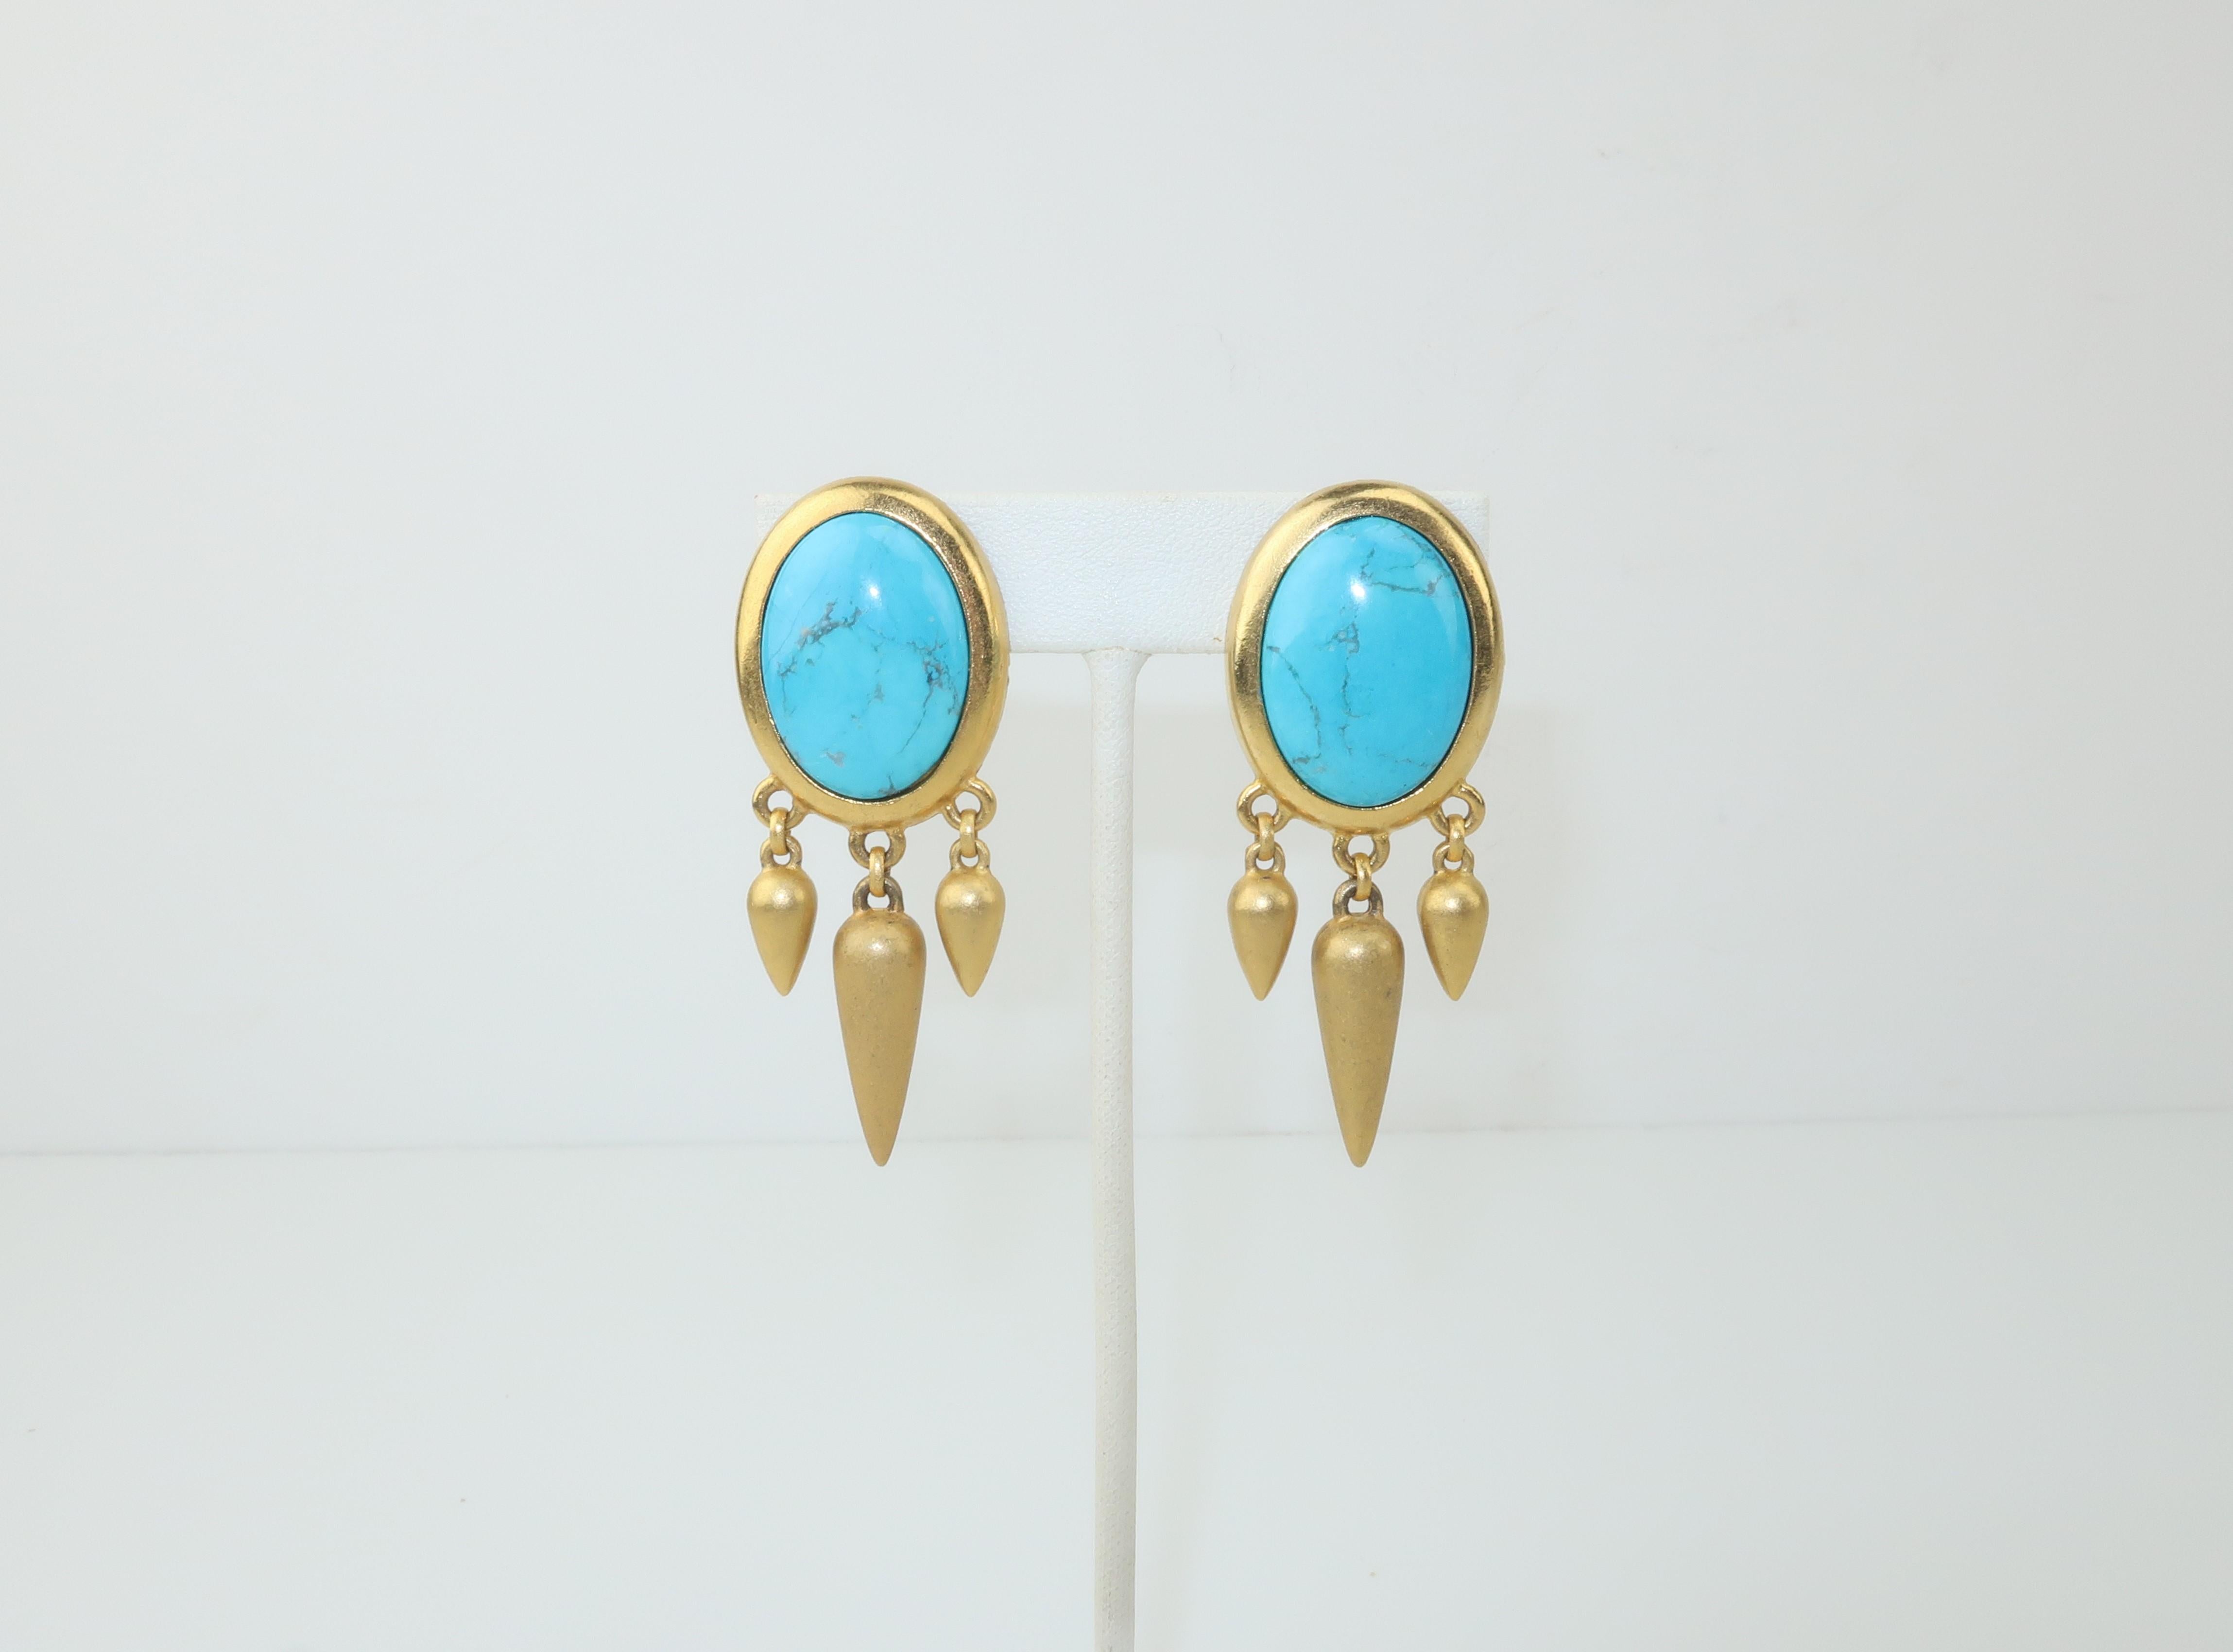 Linda Levinson combines modernity with a nod to a Victorian aesthetic with these C.1990 clip on earrings fabricated from a matte gold tone metal with an oval turquoise glass base accented by bullet shaped dangles.  Signed to the back and in very